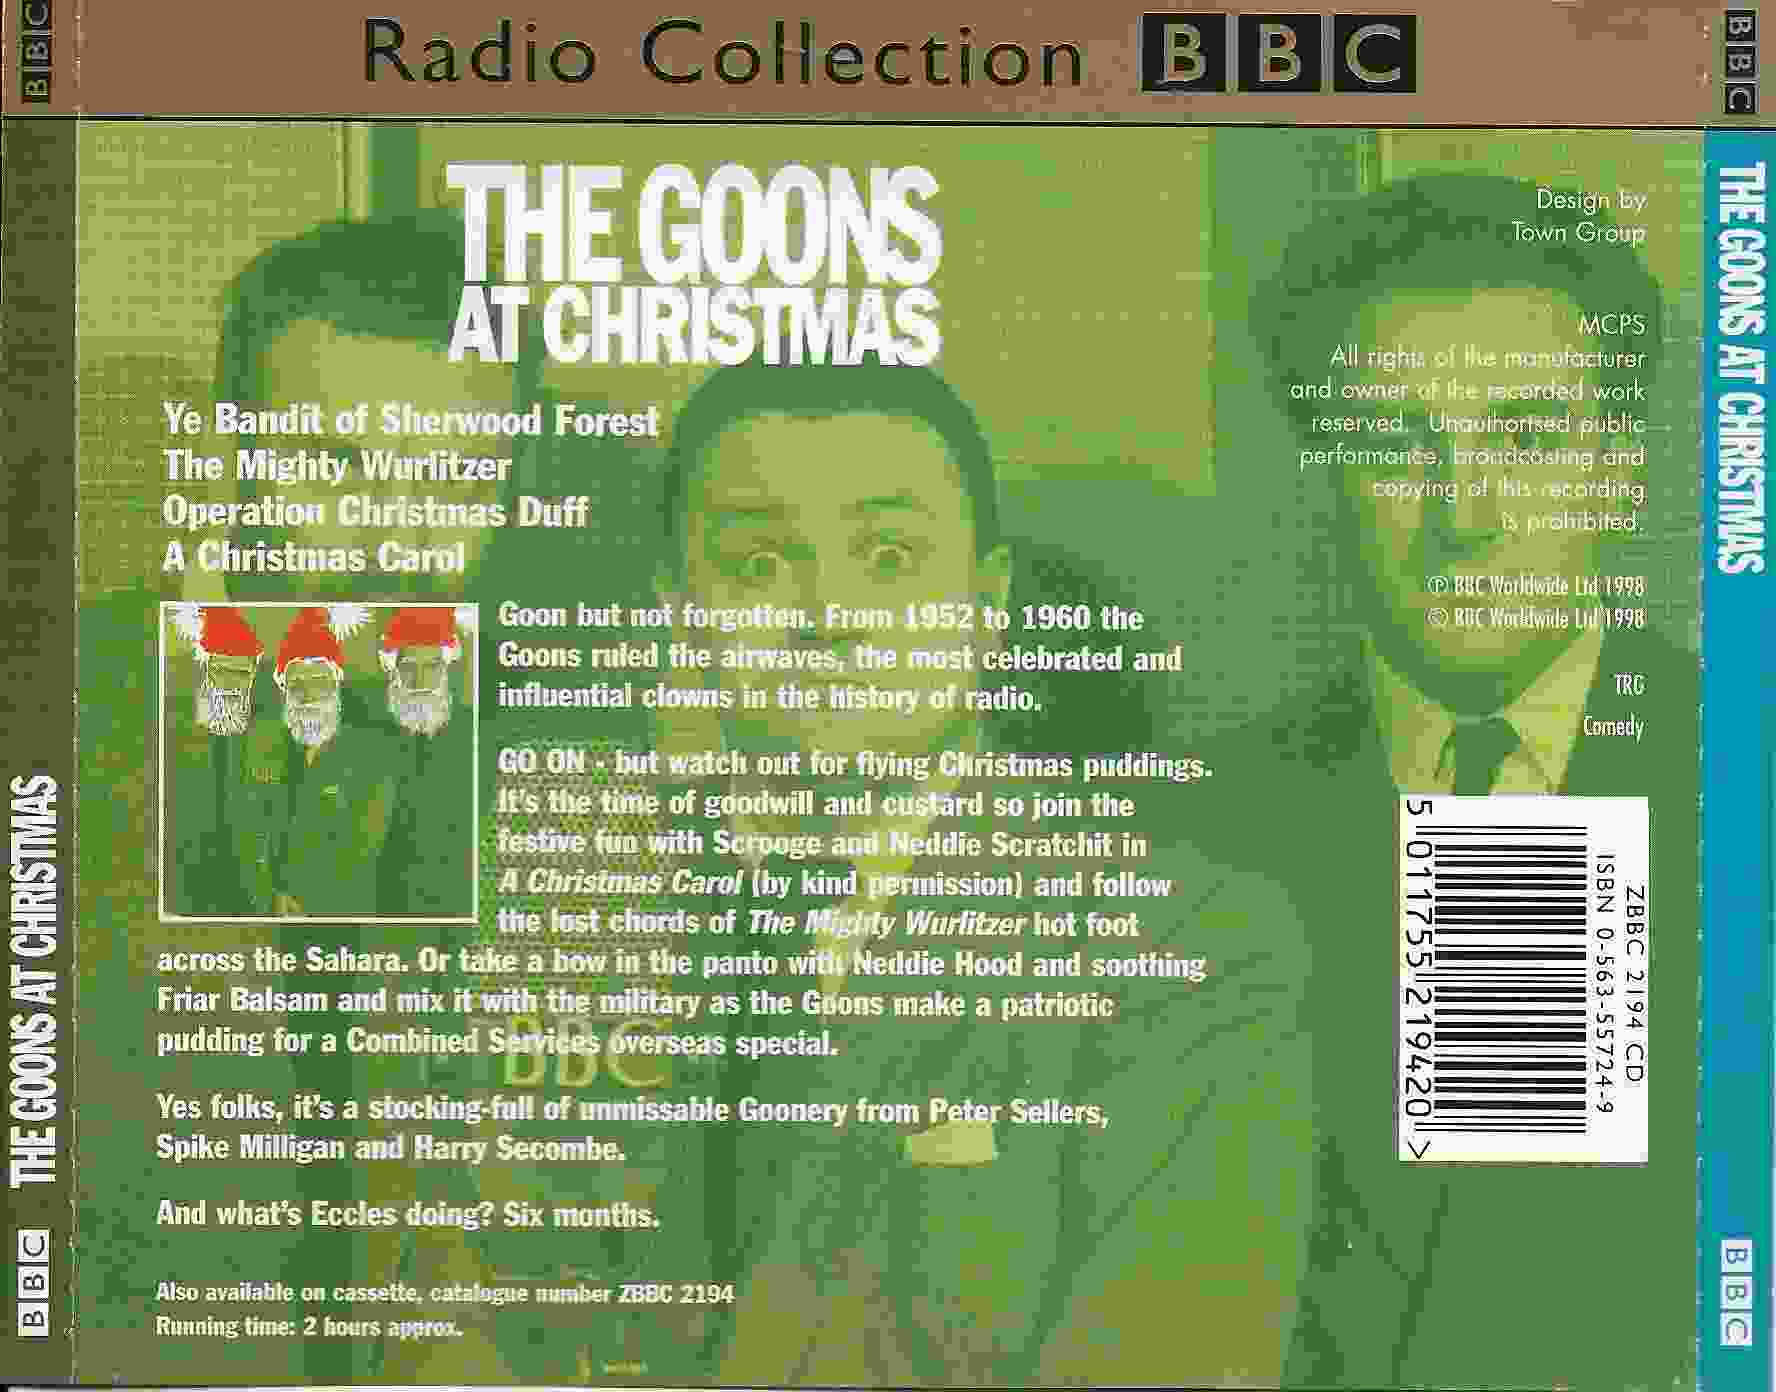 Picture of ZBBC 2194 CD The Goons at Christmas 15 by artist Spike Milligan / Eric Sykes / Larry Stephens from the BBC records and Tapes library